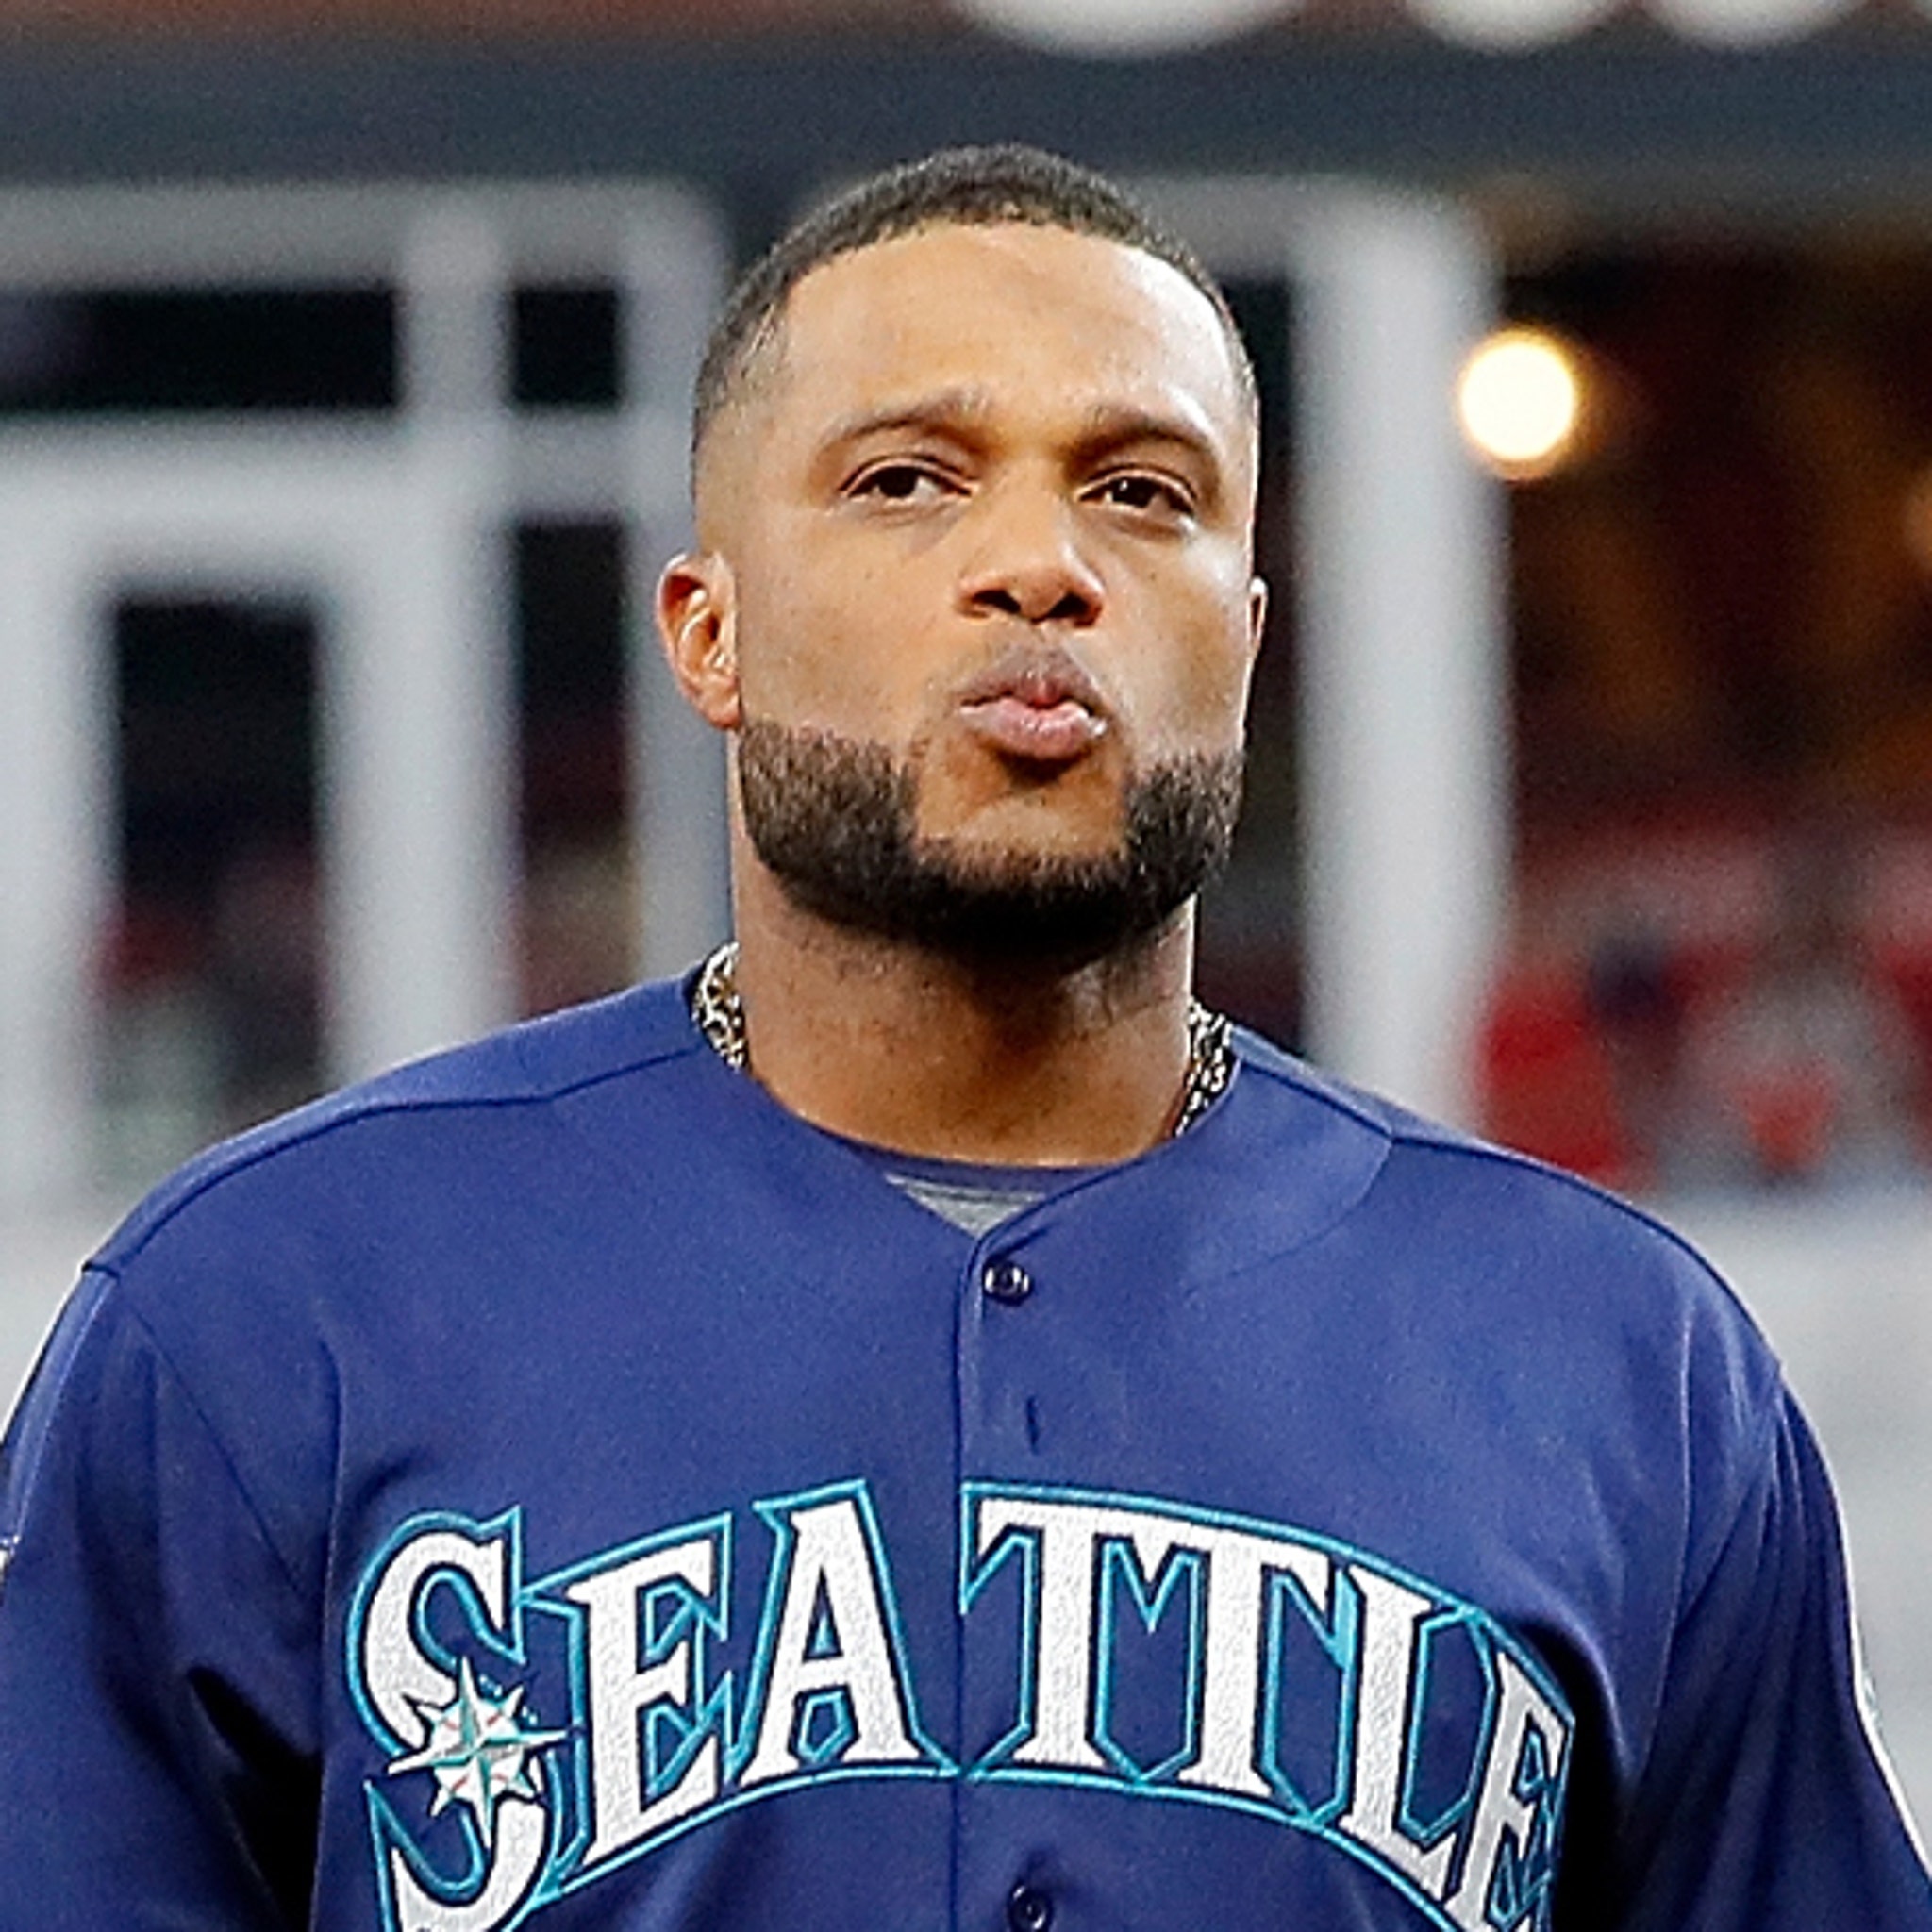 Robinson Cano: PED bust ruins rep - and leaves Mariners with